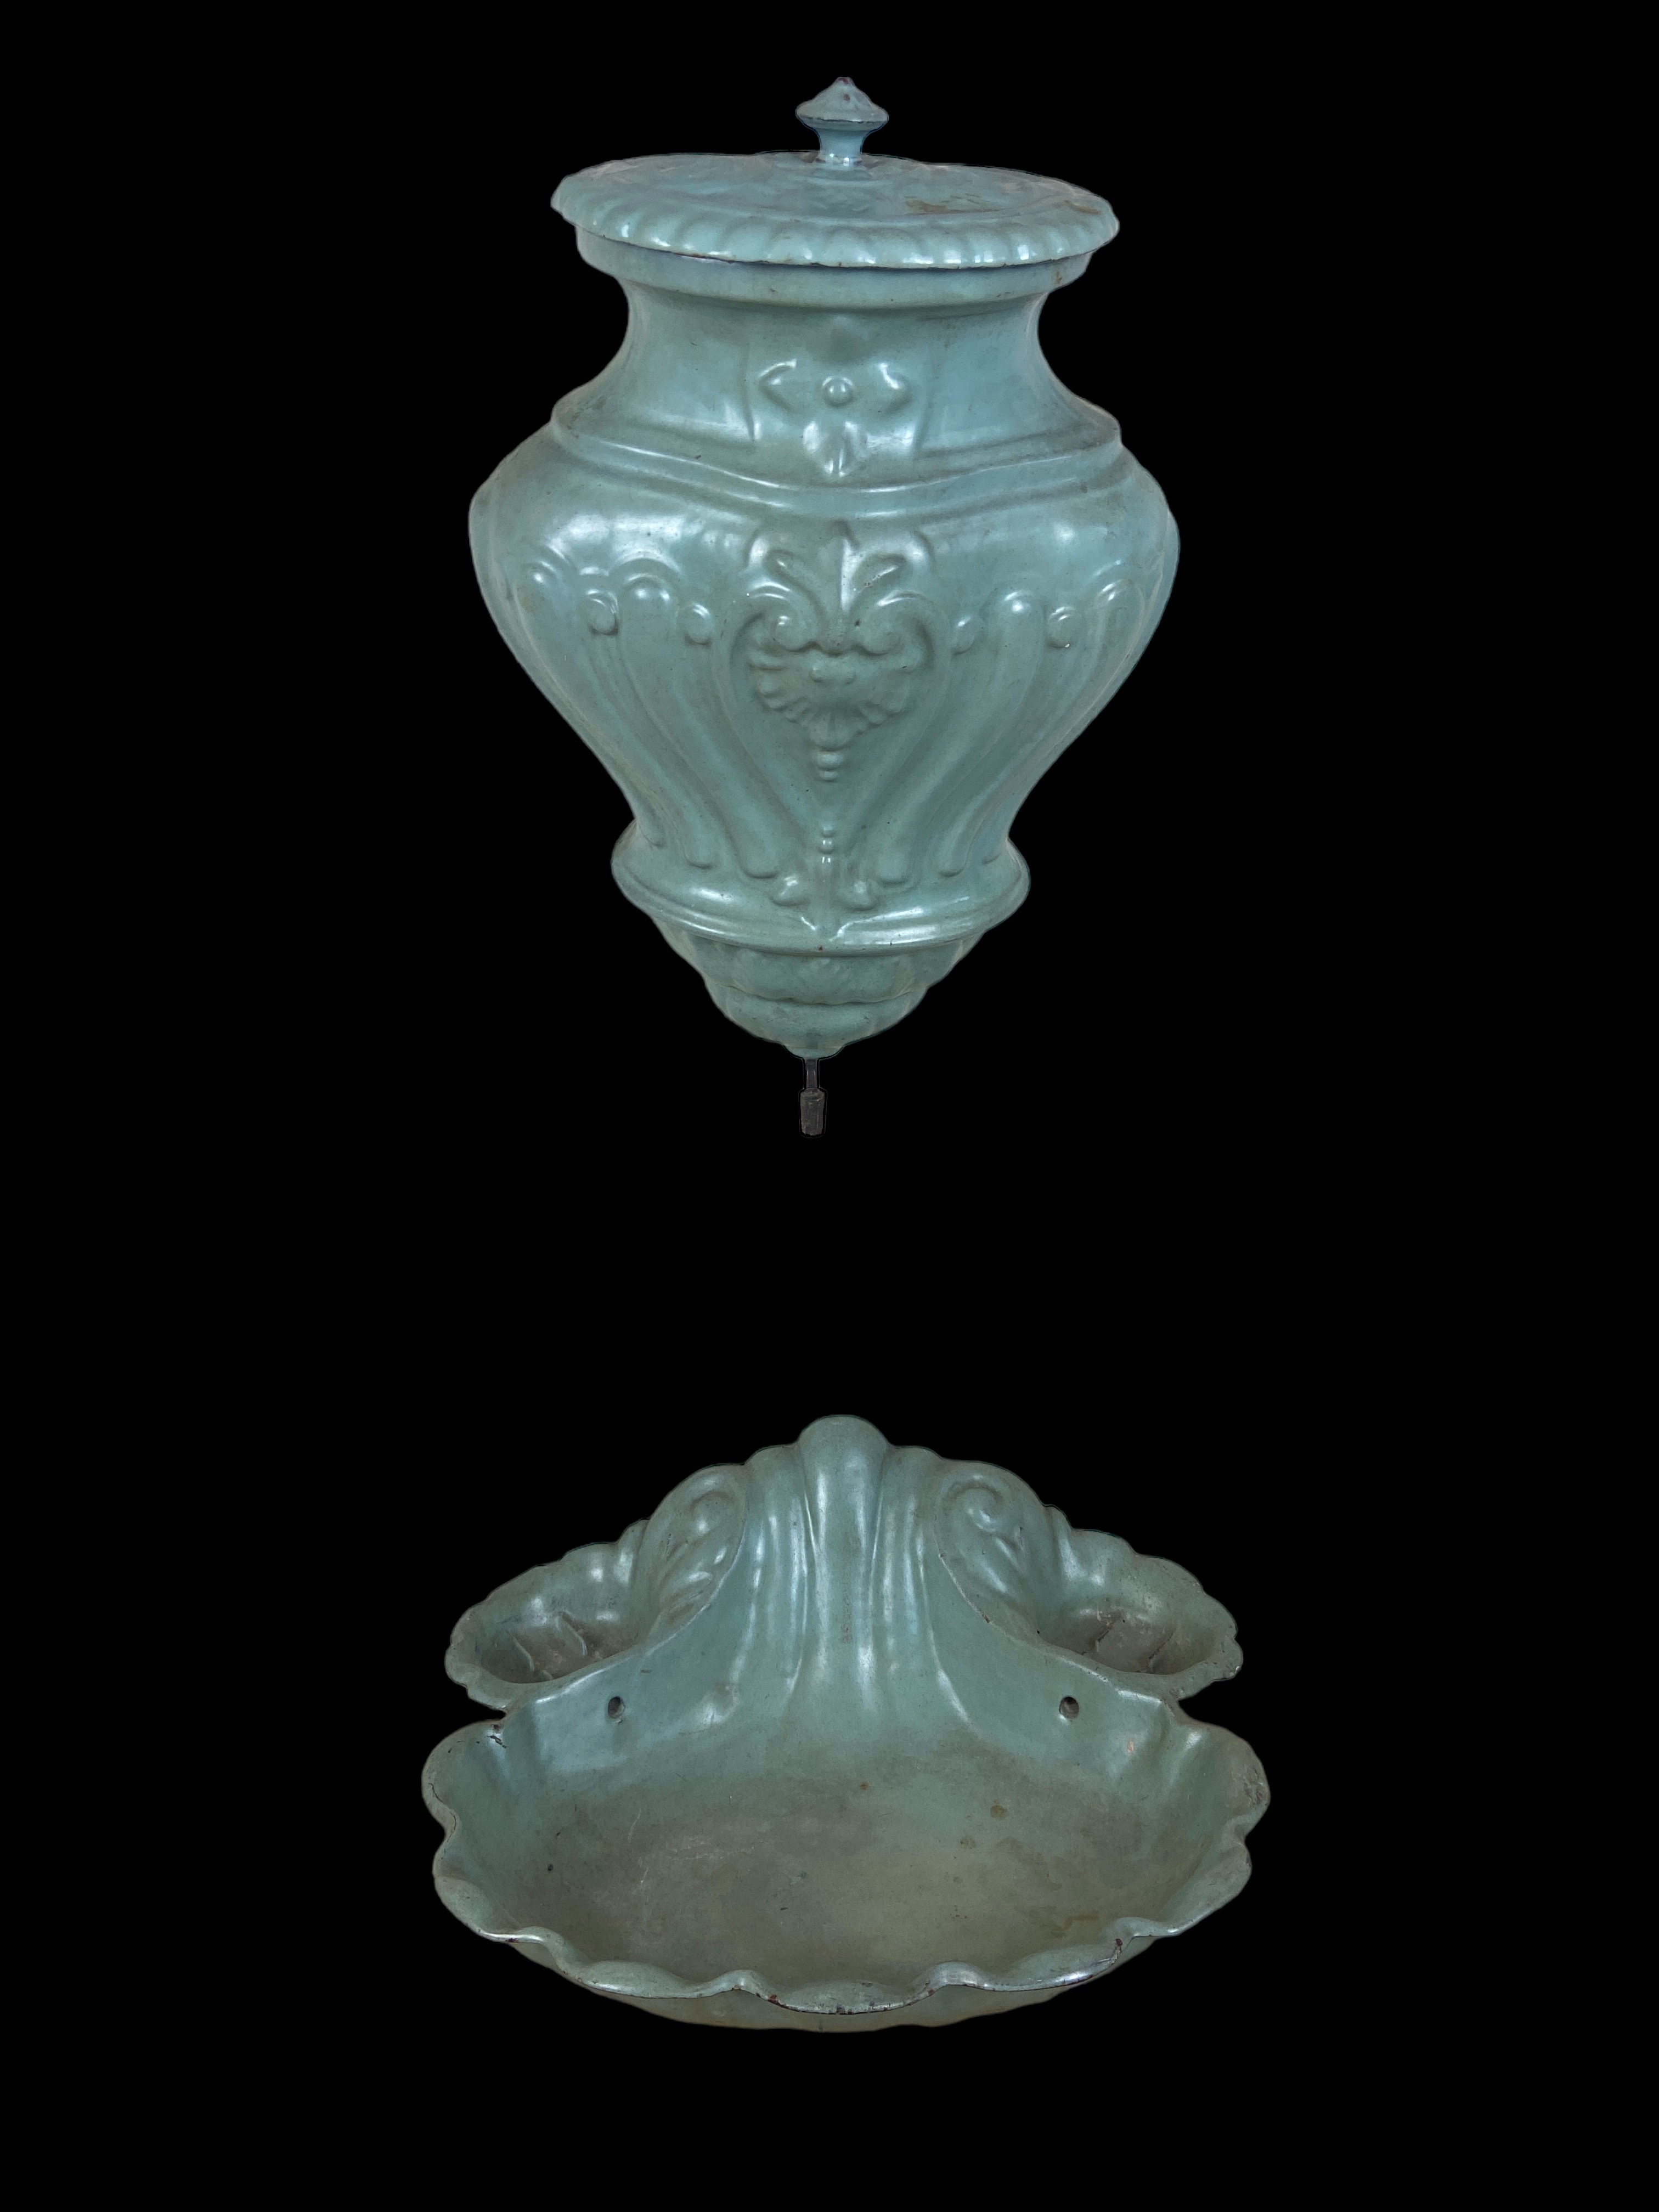 A late 19th century French light blue / green enamelled cast iron lavabo / fountain by Scellier